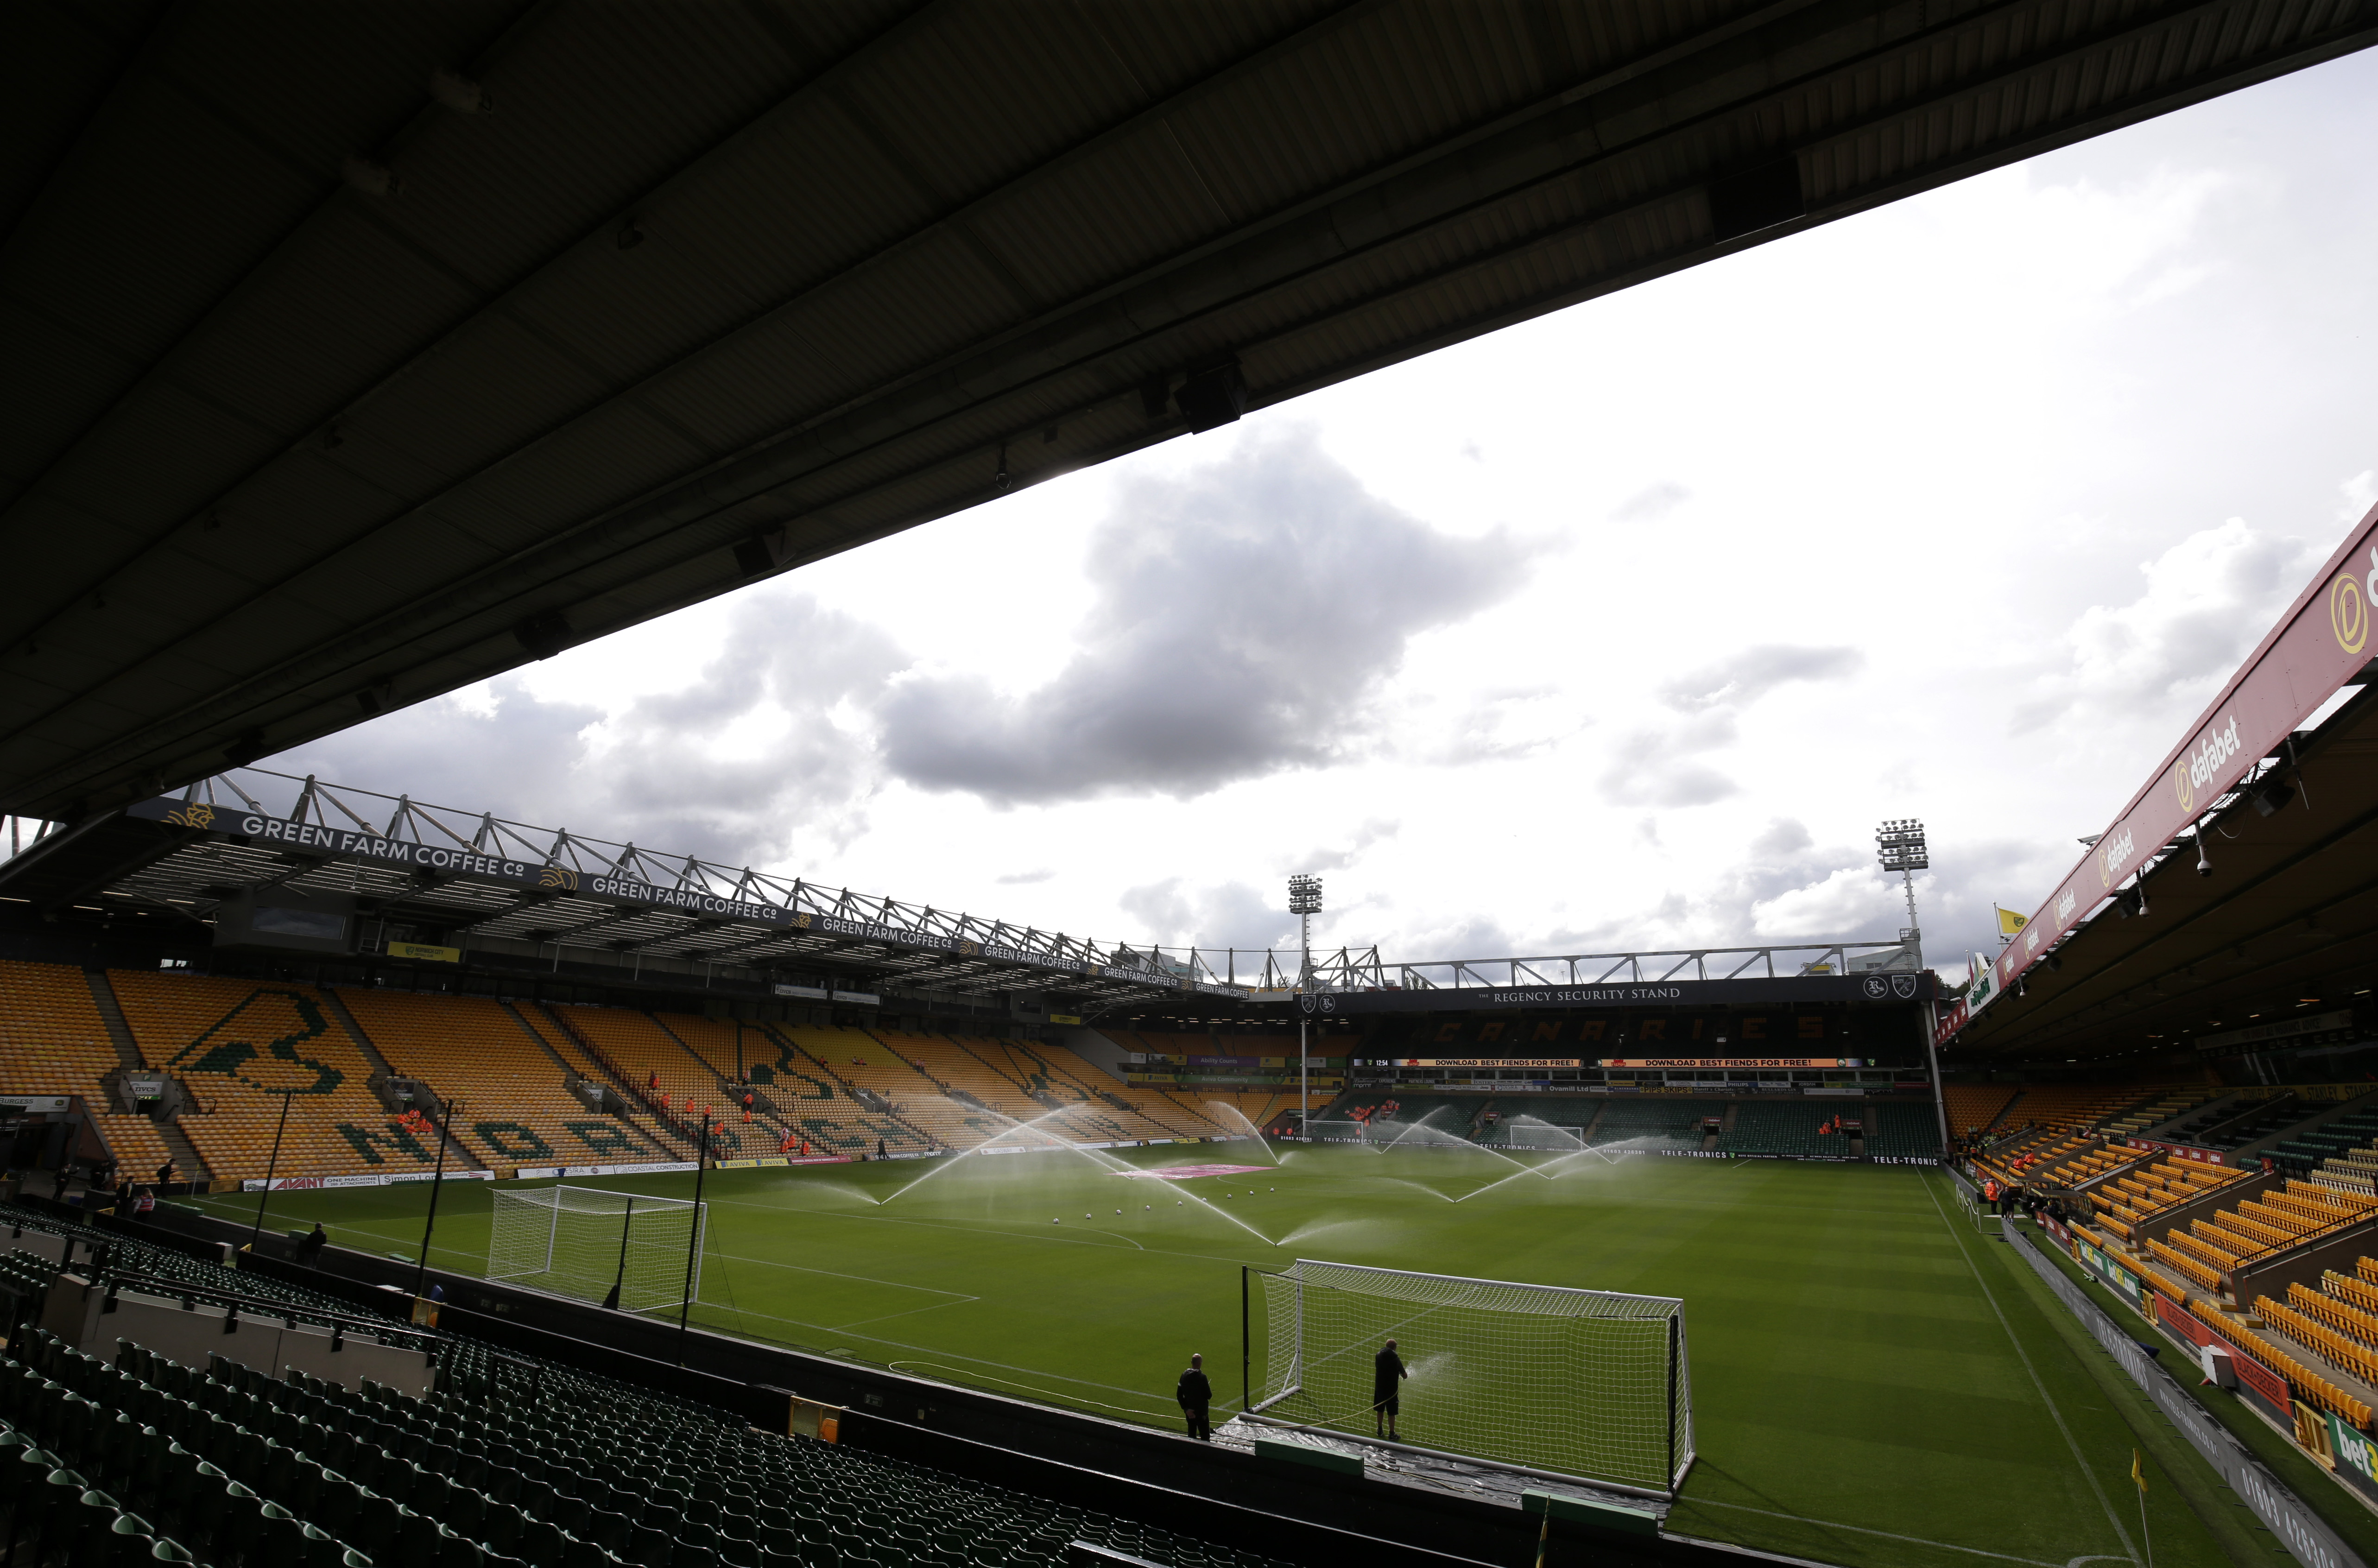 NORWICH, ENGLAND - OCTOBER 05: General view inside the stadium ahead of the Premier League match between Norwich City and Aston Villa at Carrow Road on October 05, 2019 in Norwich, United Kingdom. (Photo by Henry Browne/Getty Images)